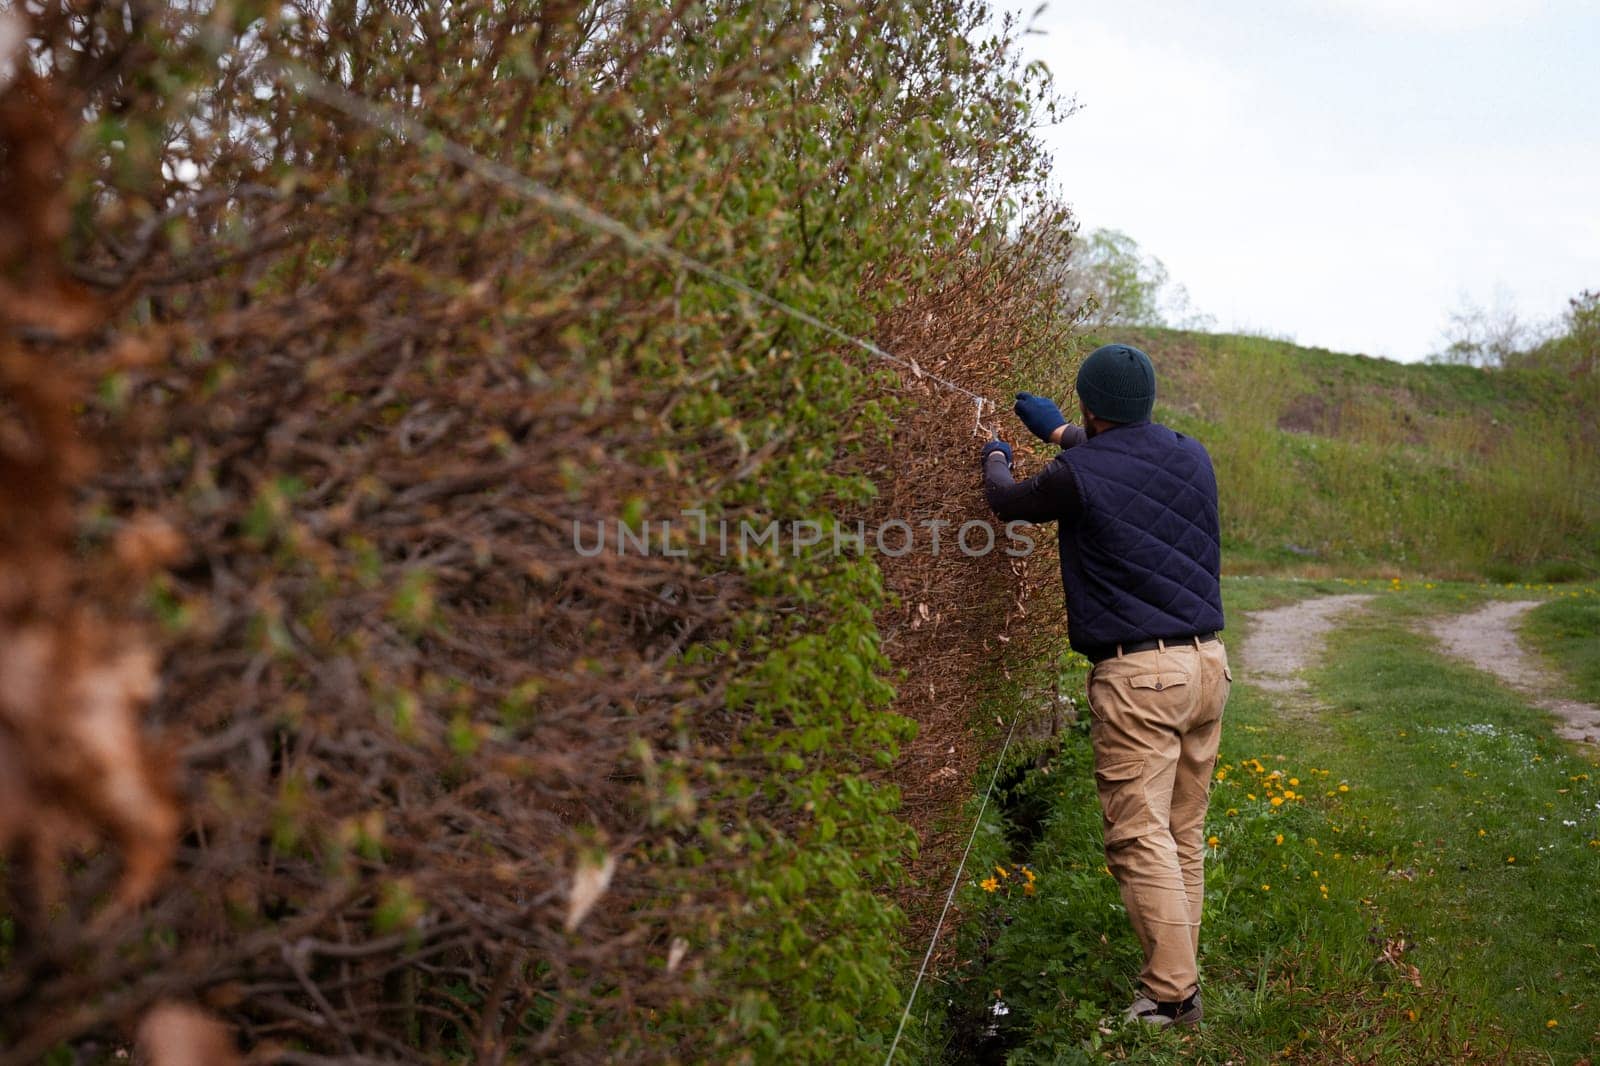 A male gardener trims a hedge in early spring, leveling it with stretched laces by Niko_Cingaryuk